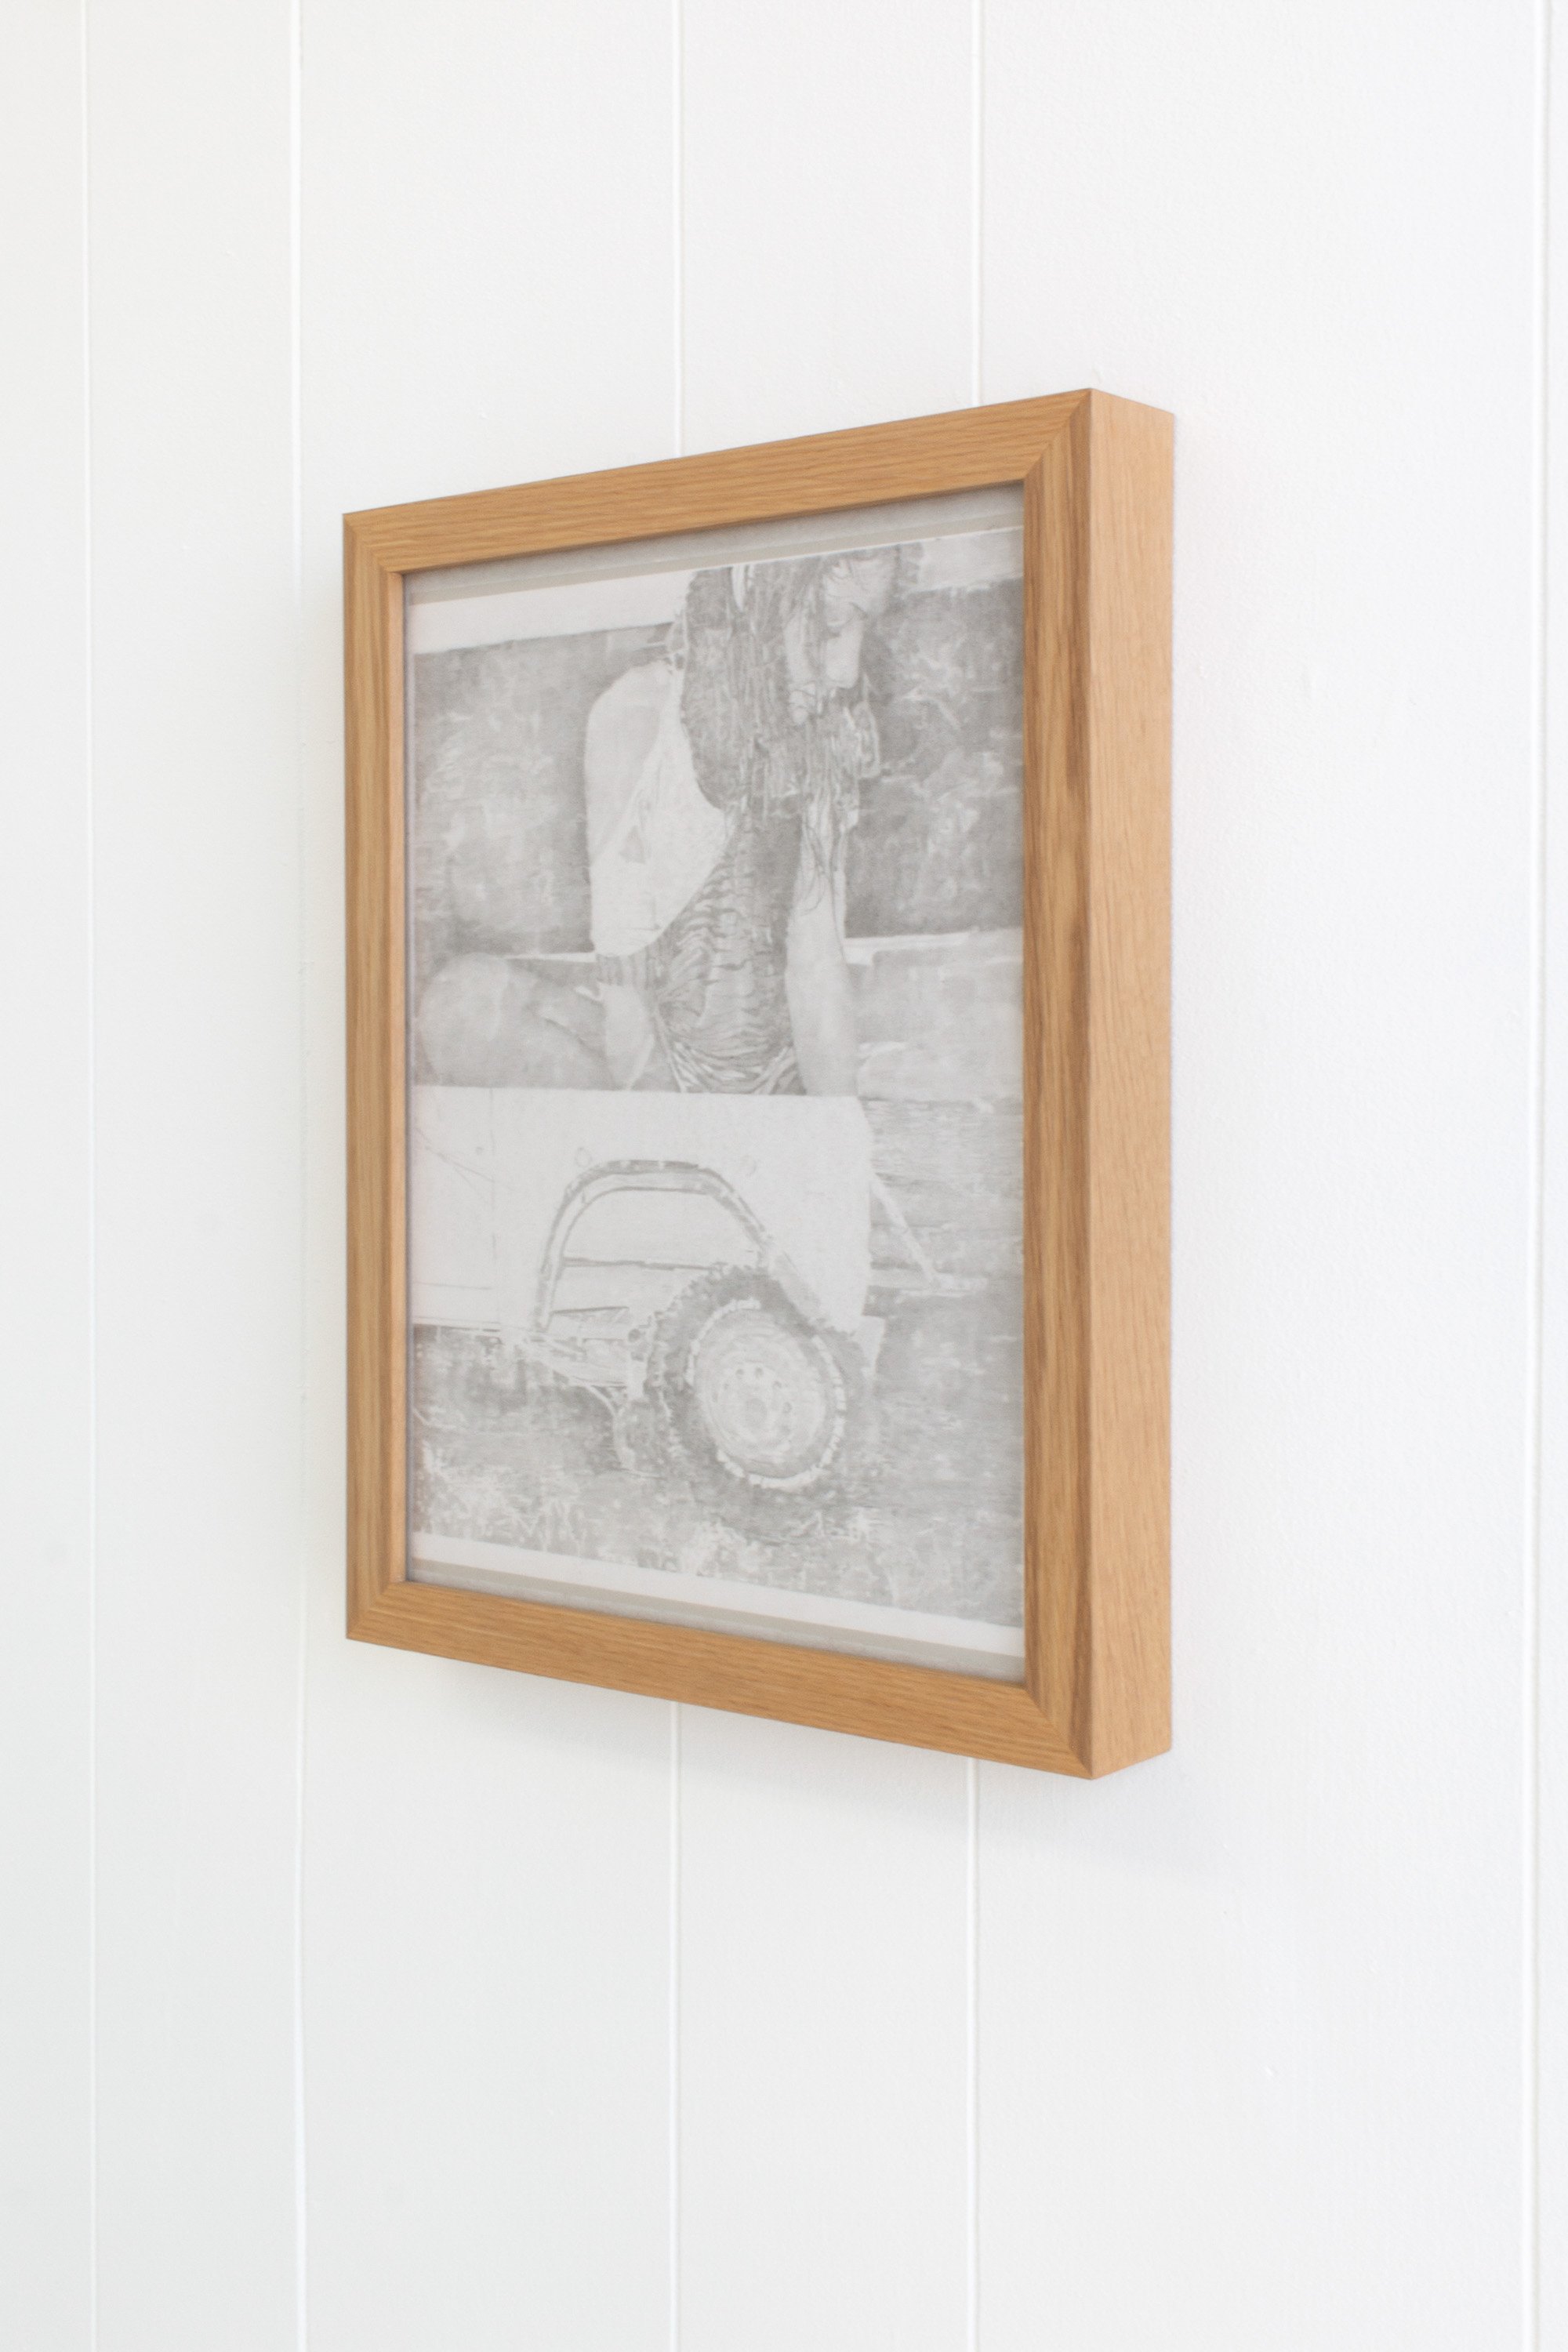  Jamieson Pearl  And now the road smells like a flock drowned in diesel fuel , 2022 Graphite on tracing paper on printer paper on drawing paper, white oak frame 9 x 12 in (10.5 x 13.5 x 1.5 in framed) 